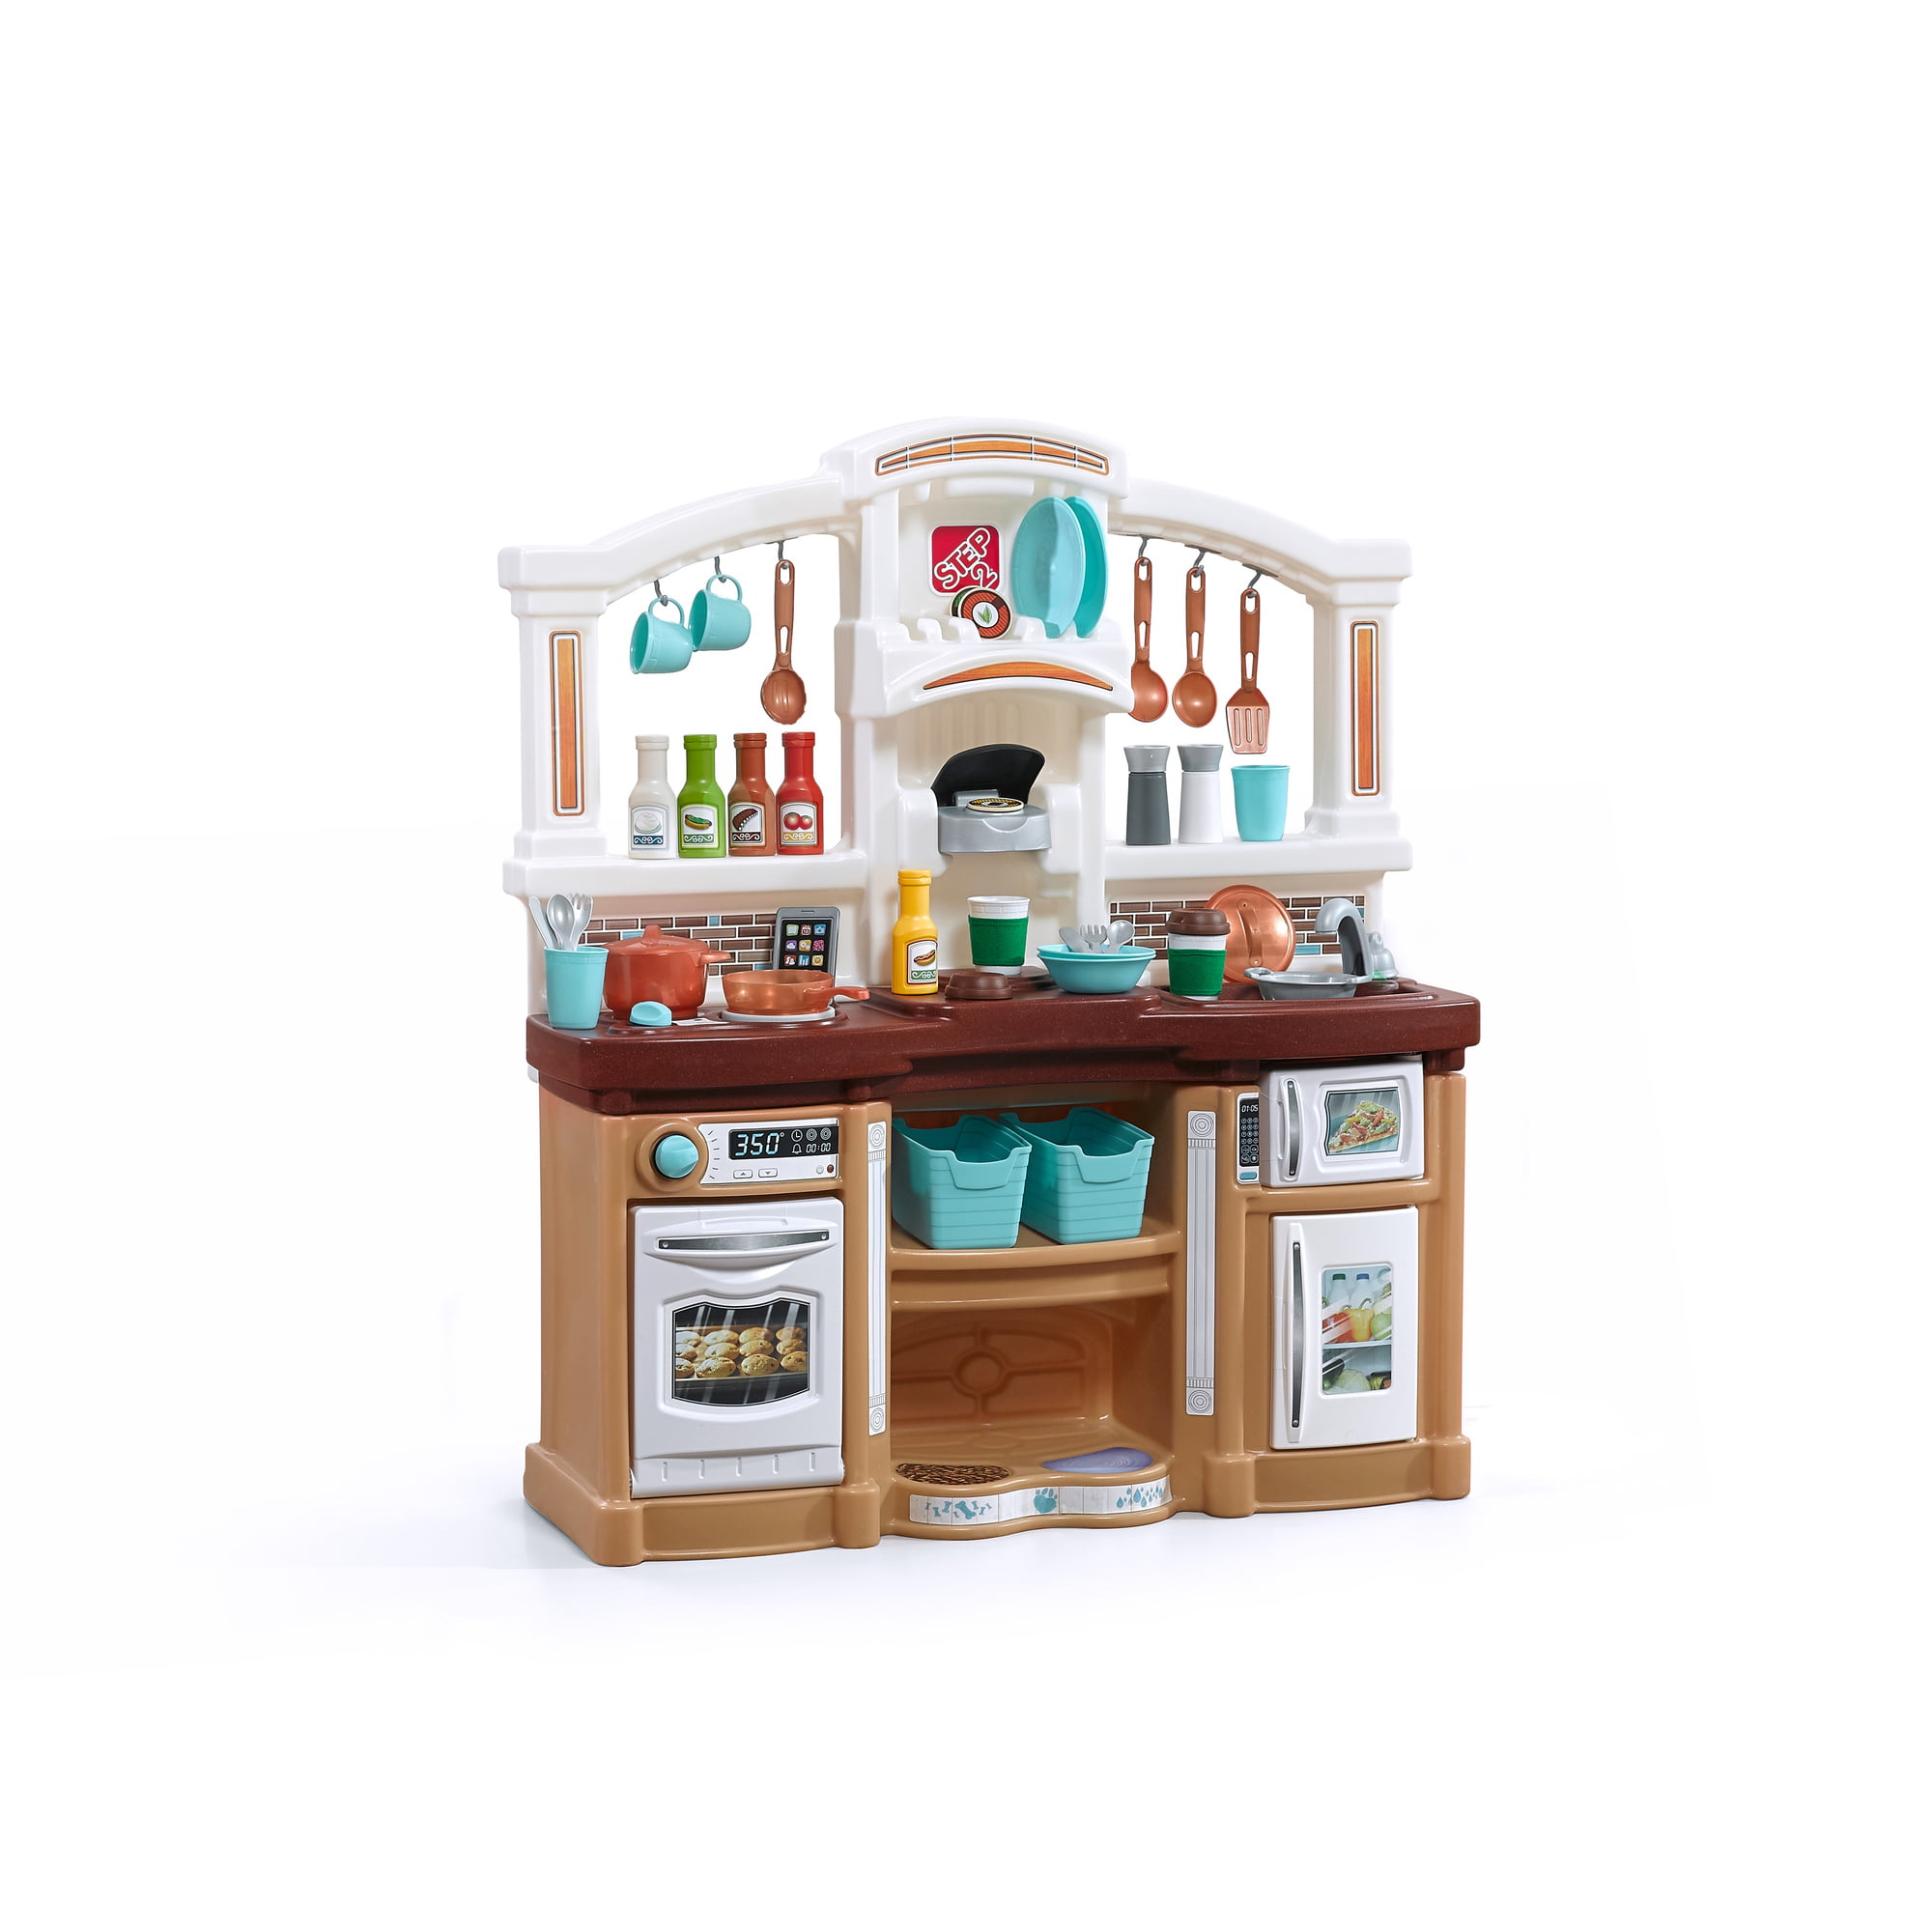 Kids Kitchen Play Set Pretend Baker Cooking Playset Xmas Toy Gift For Boys Gifts 